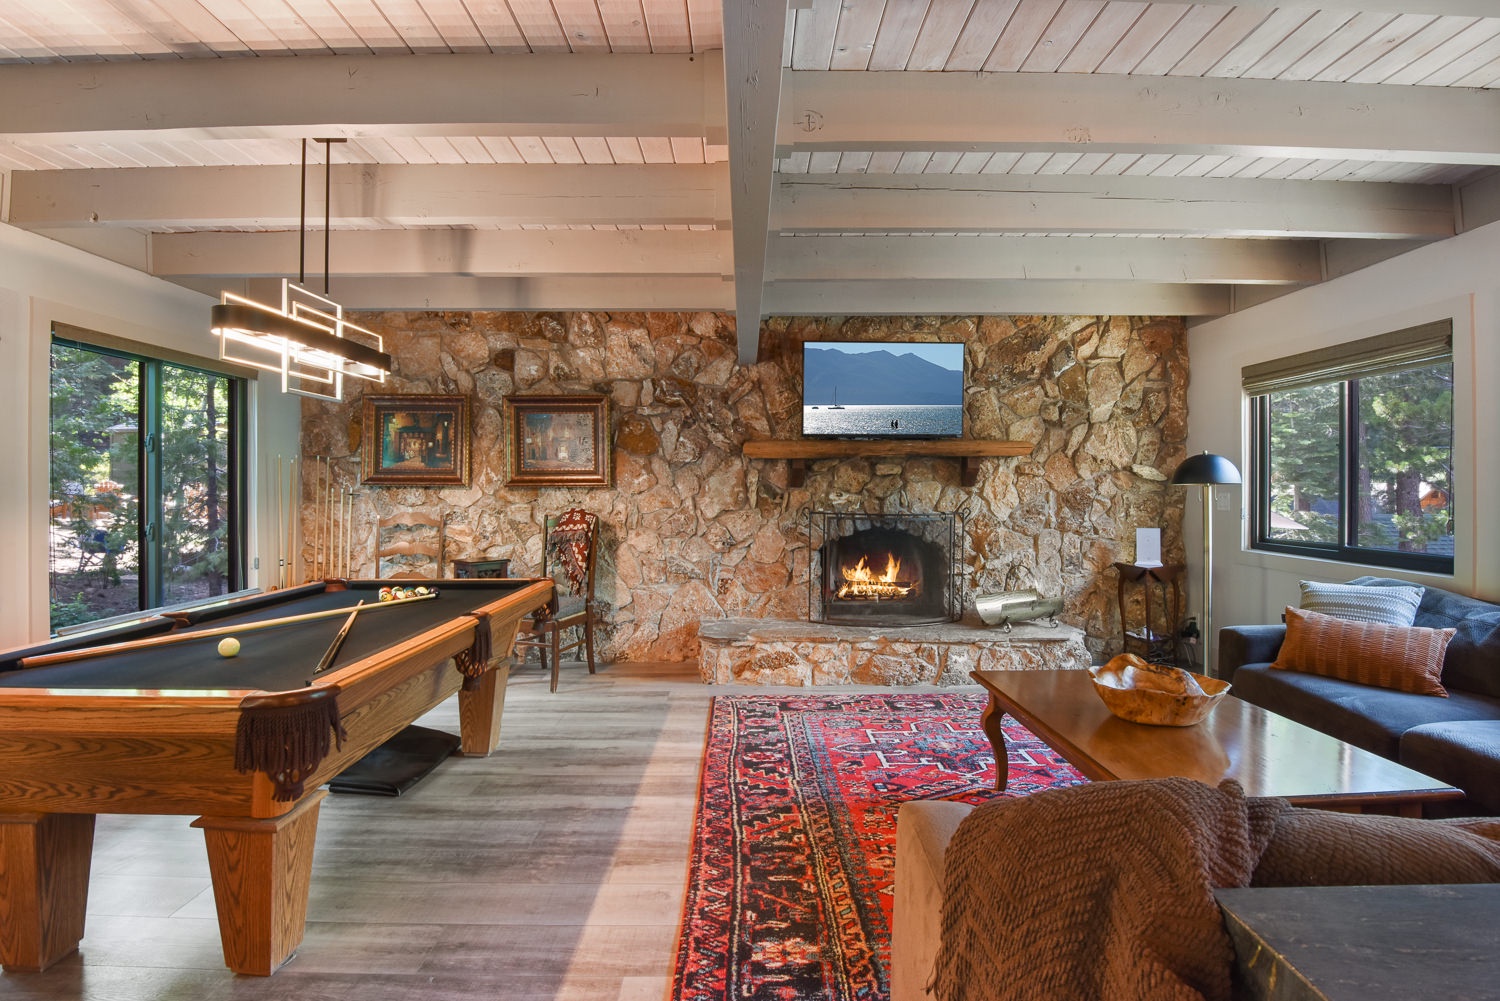 Cozy and spacious living area with Pool Table, TV, and Fireplace